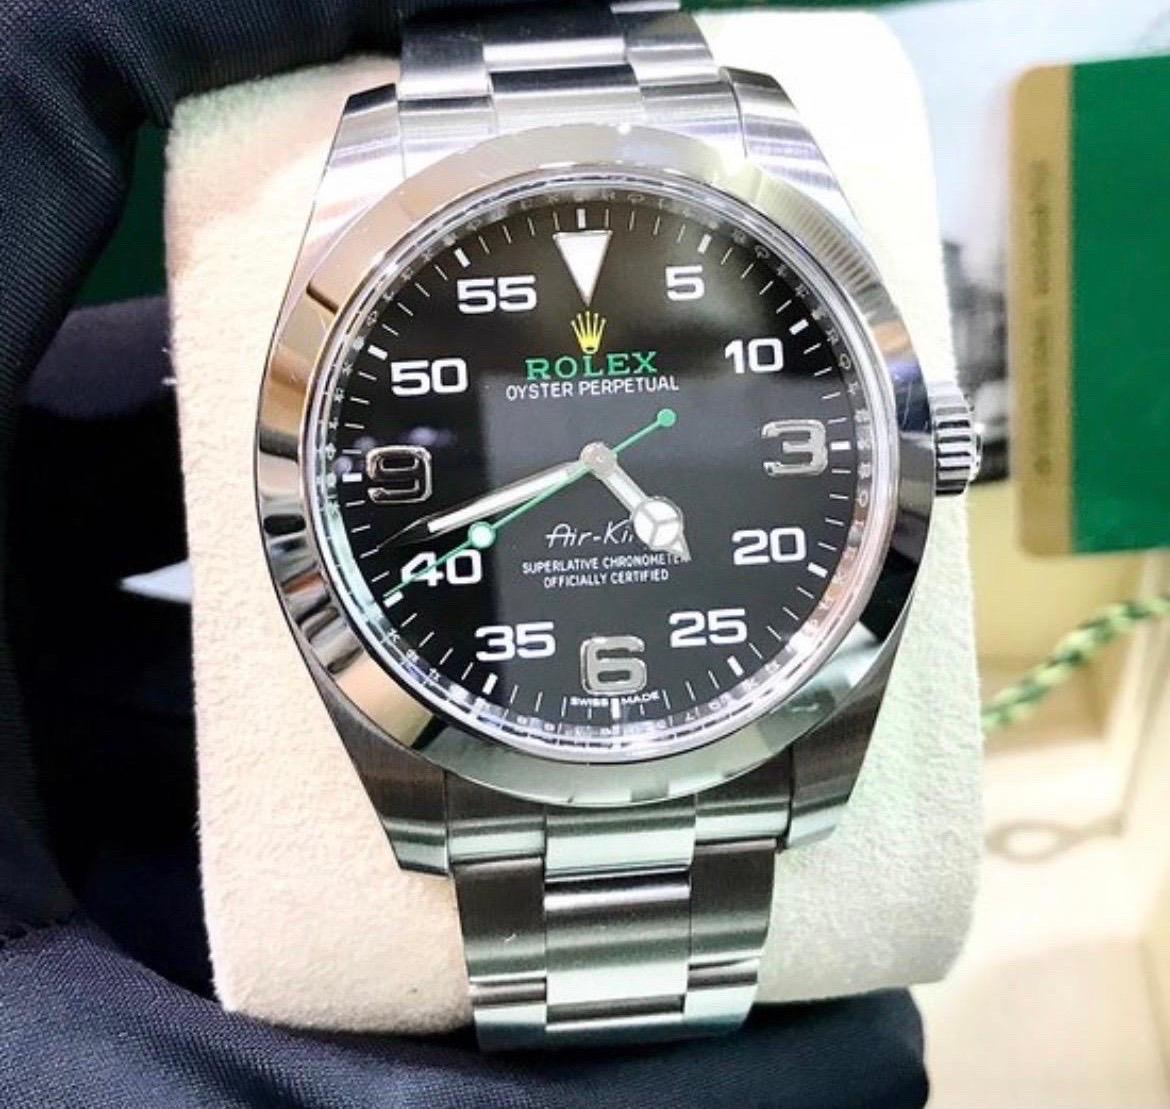 Rolex Oyster Perpetual Air King Black Dial Steel Mens Watch 116900 Box Card. Officially certified chronometer self-winding movement. Stainless steel case 40.0 mm in diameter. Rolex logo on a crown. Stainless steel smooth domed bezel. Scratch